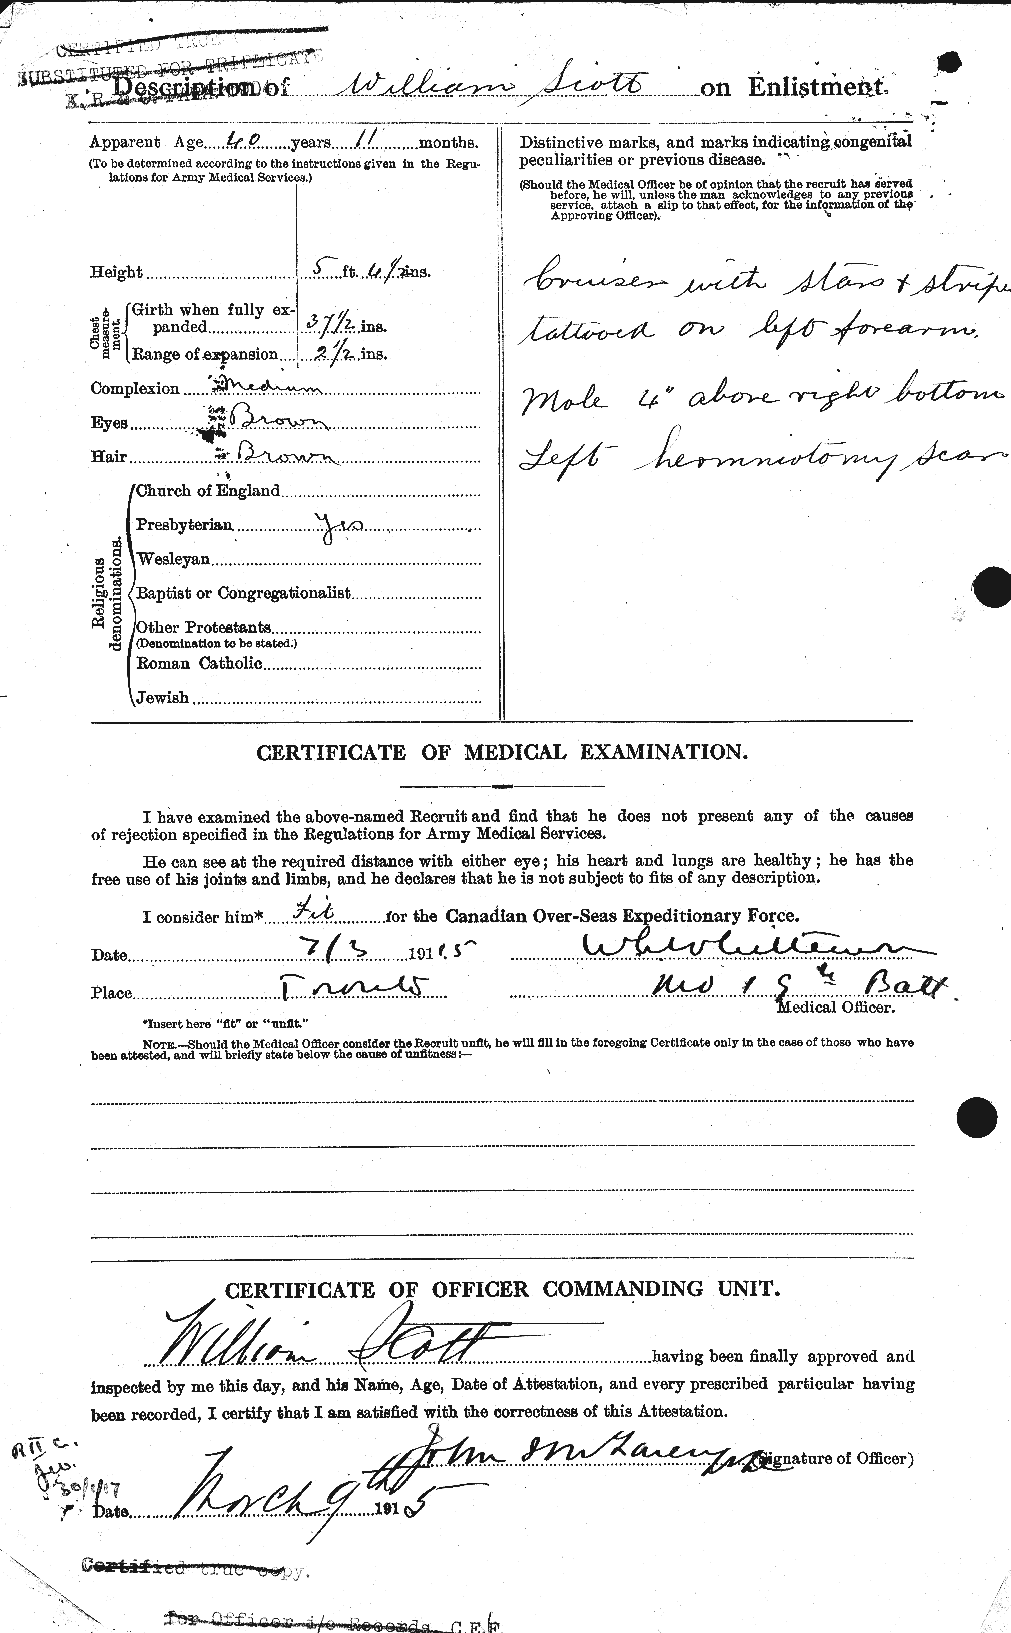 Personnel Records of the First World War - CEF 087357b